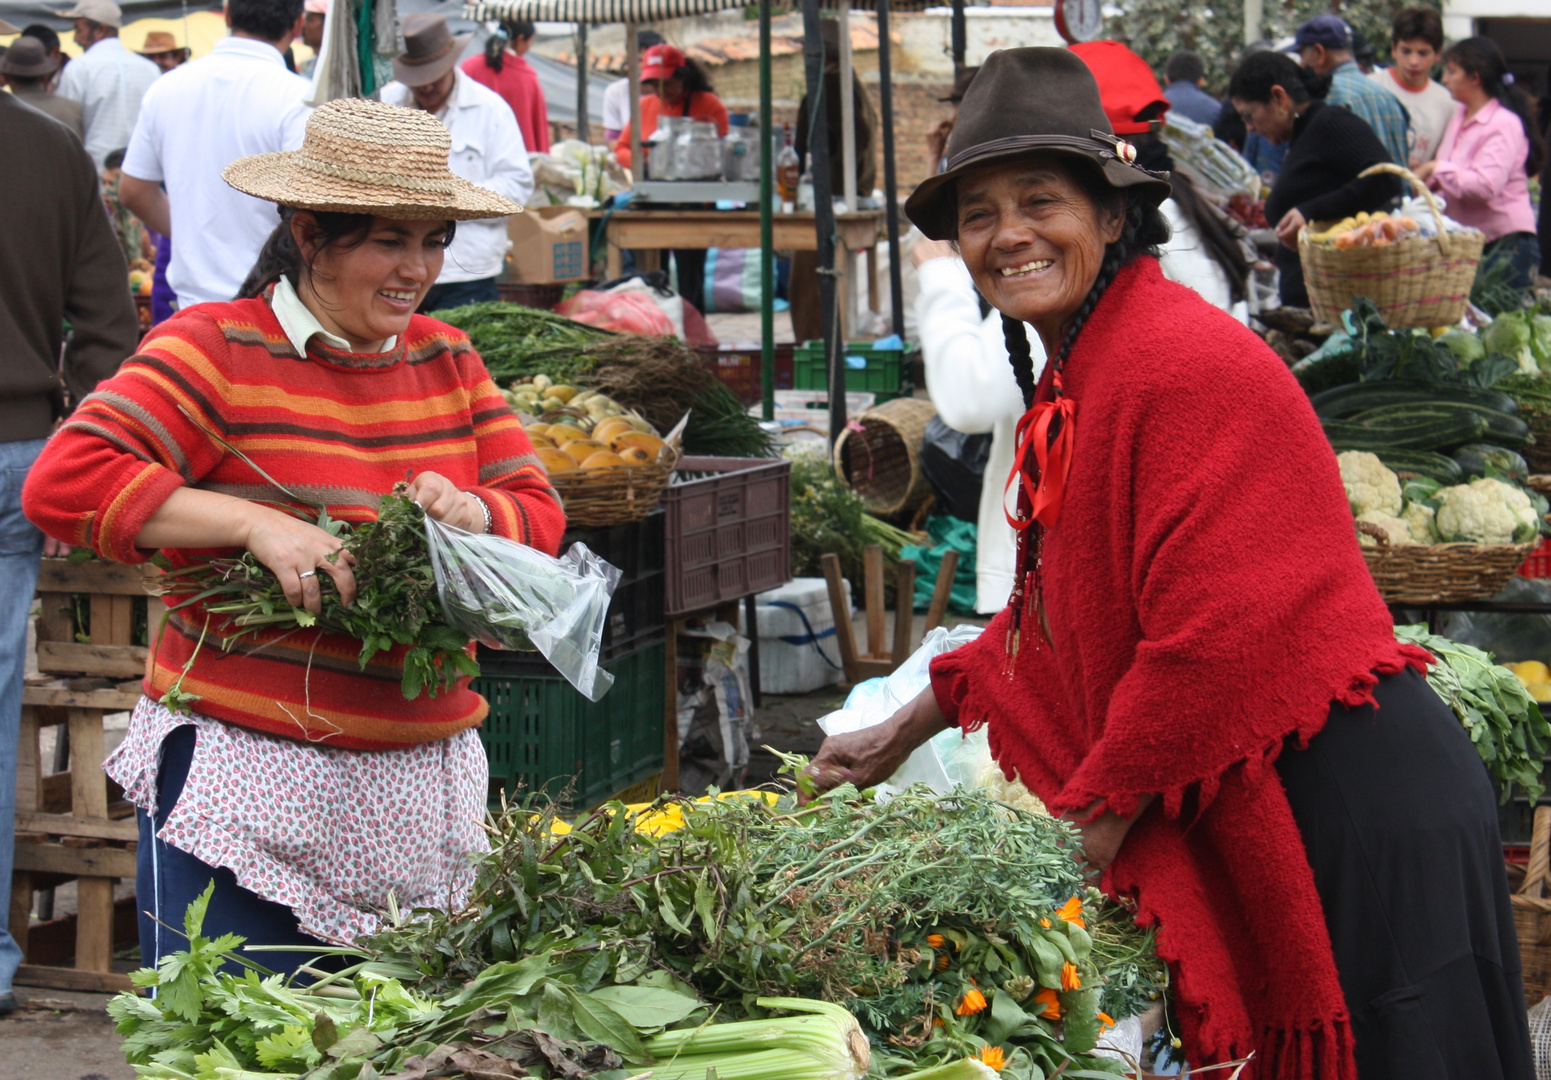 Indian Market in Colombia